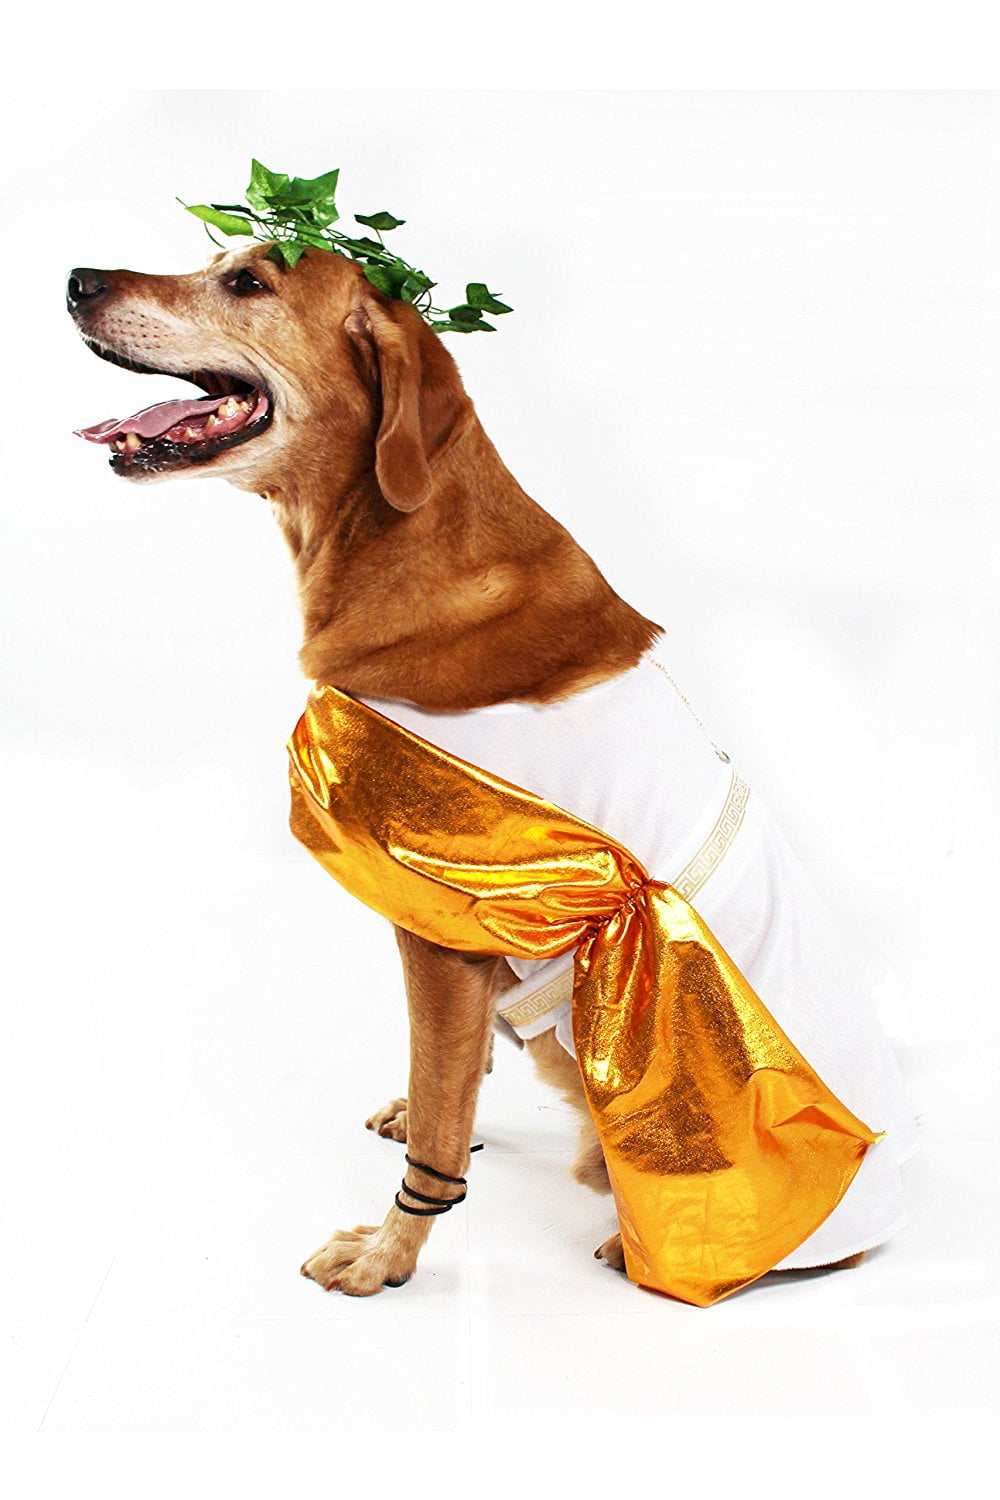 8 Scary Dog Costumes That Are Perfect For Halloween - The Dodo